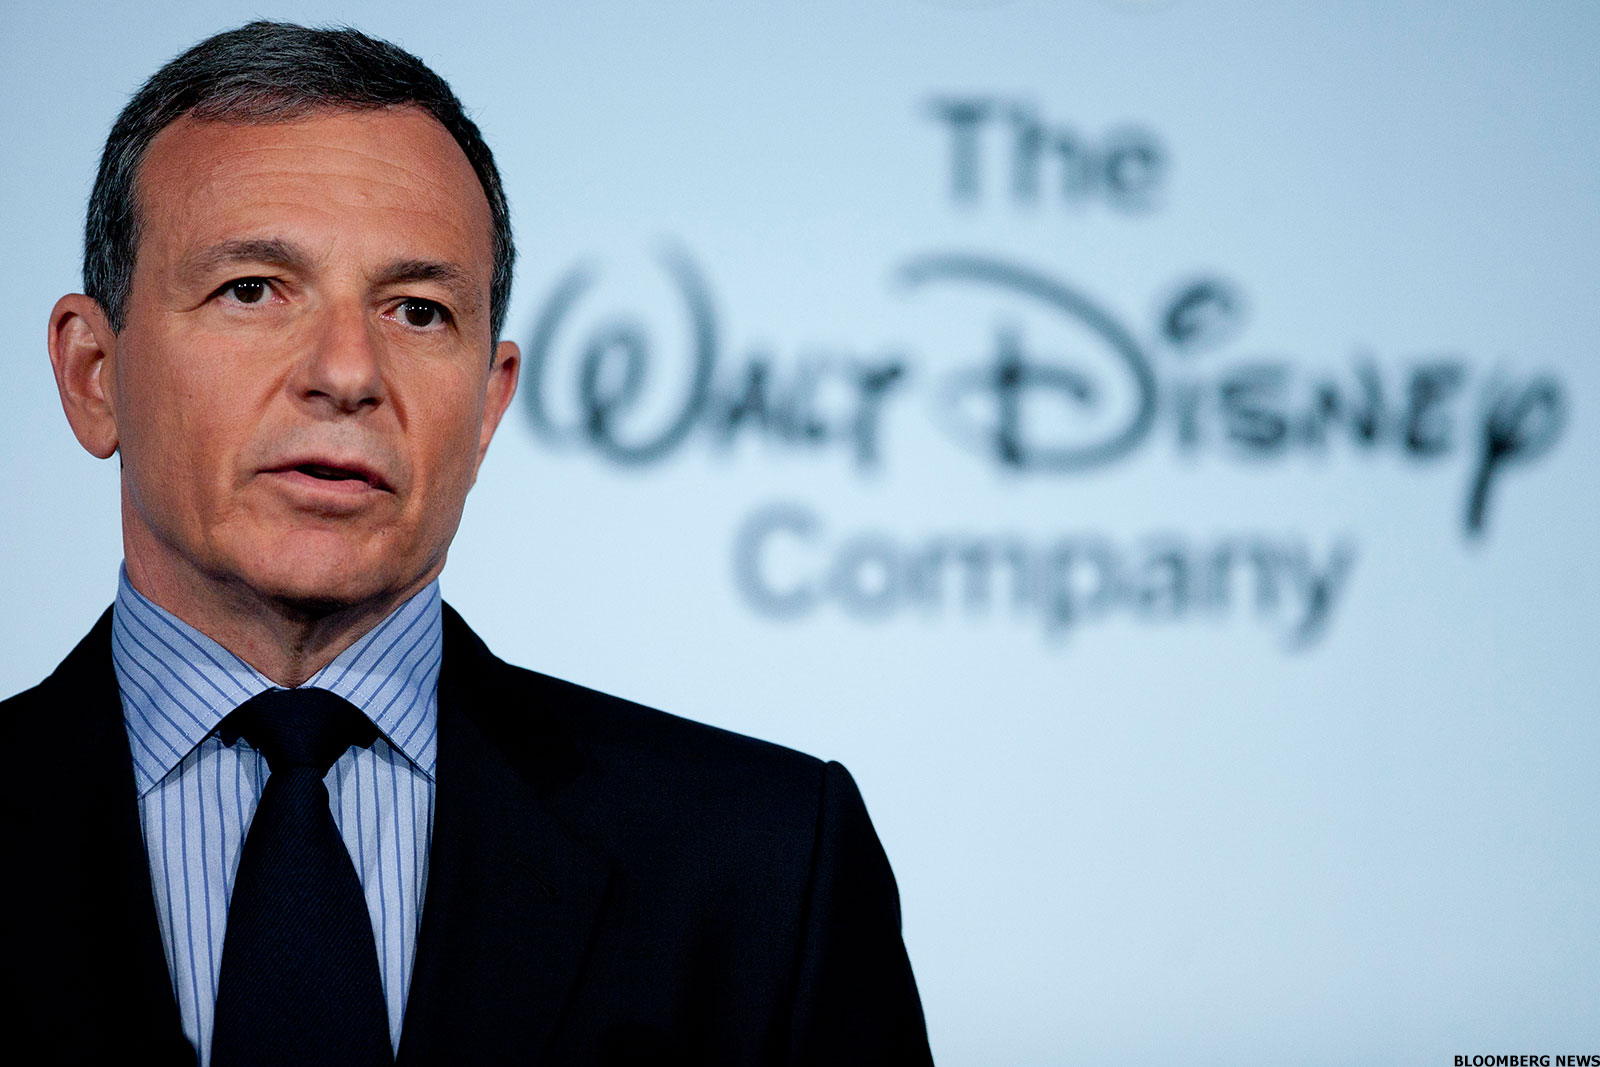 Disney’s CEO Bob Iger talks about the Future of Disney after a long decade of acquisition.